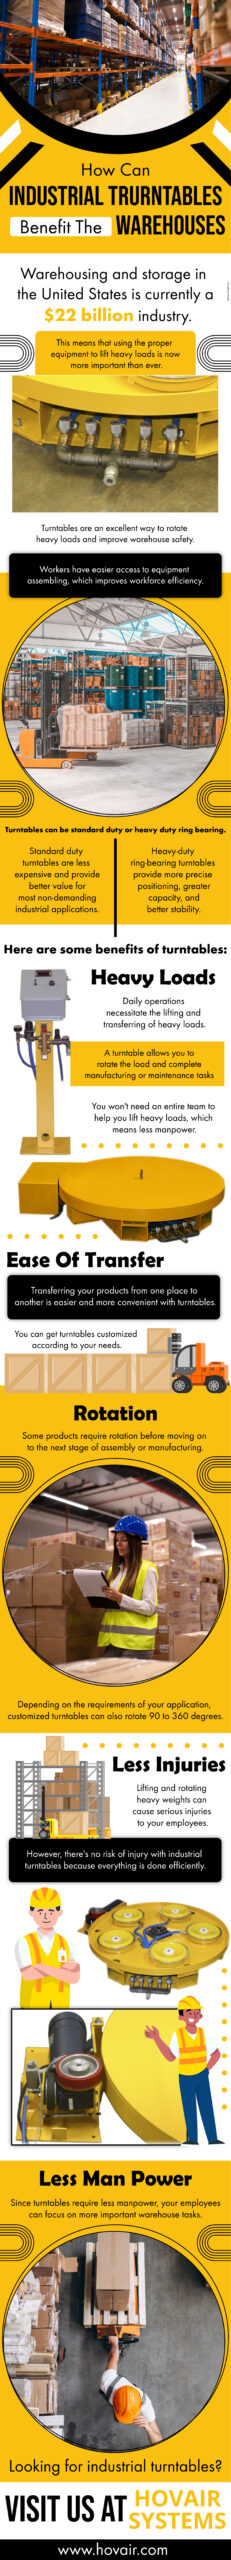 How Can Industrial Turntables Benefit The Warehouses